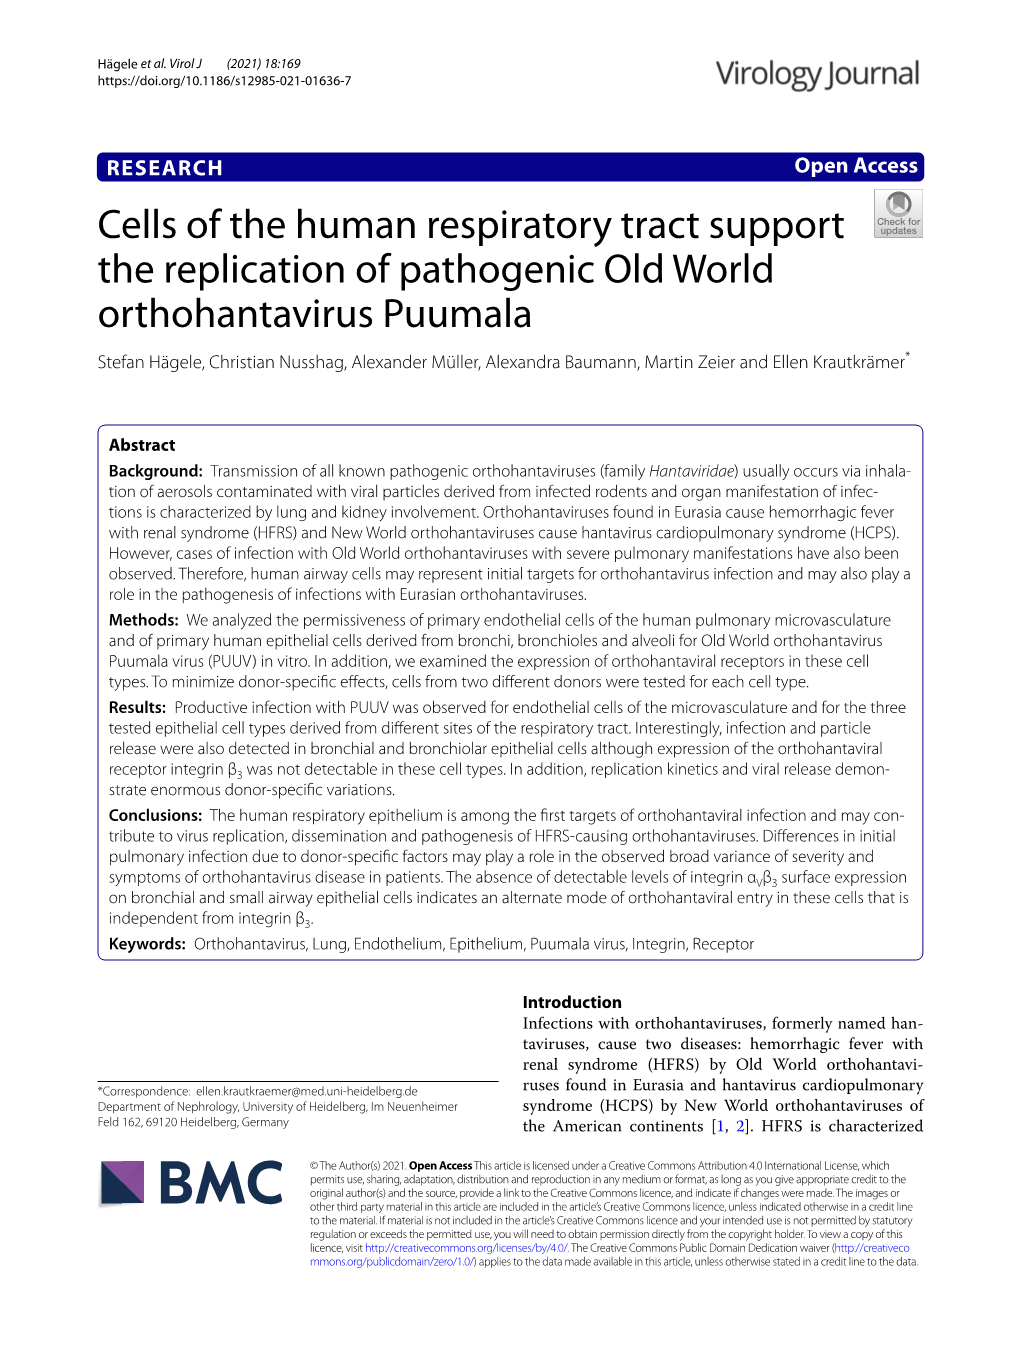 Cells of the Human Respiratory Tract Support the Replication Of